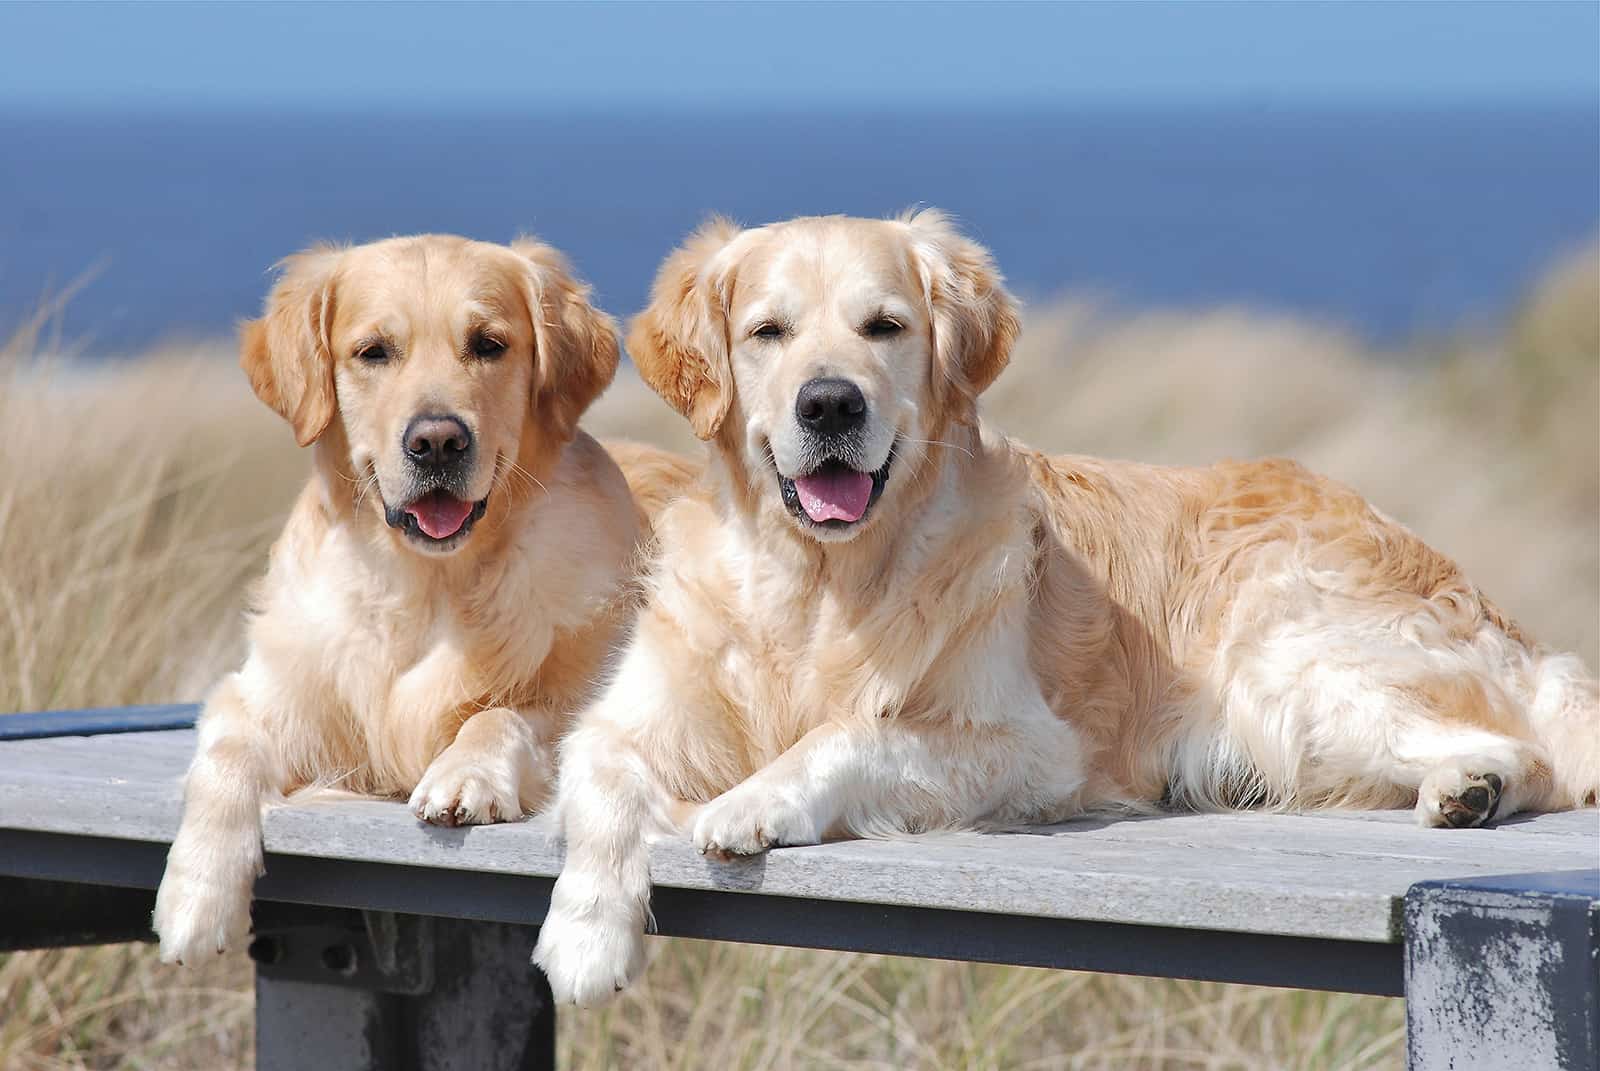 two golden retrievers lying on a wooden bench at the beach